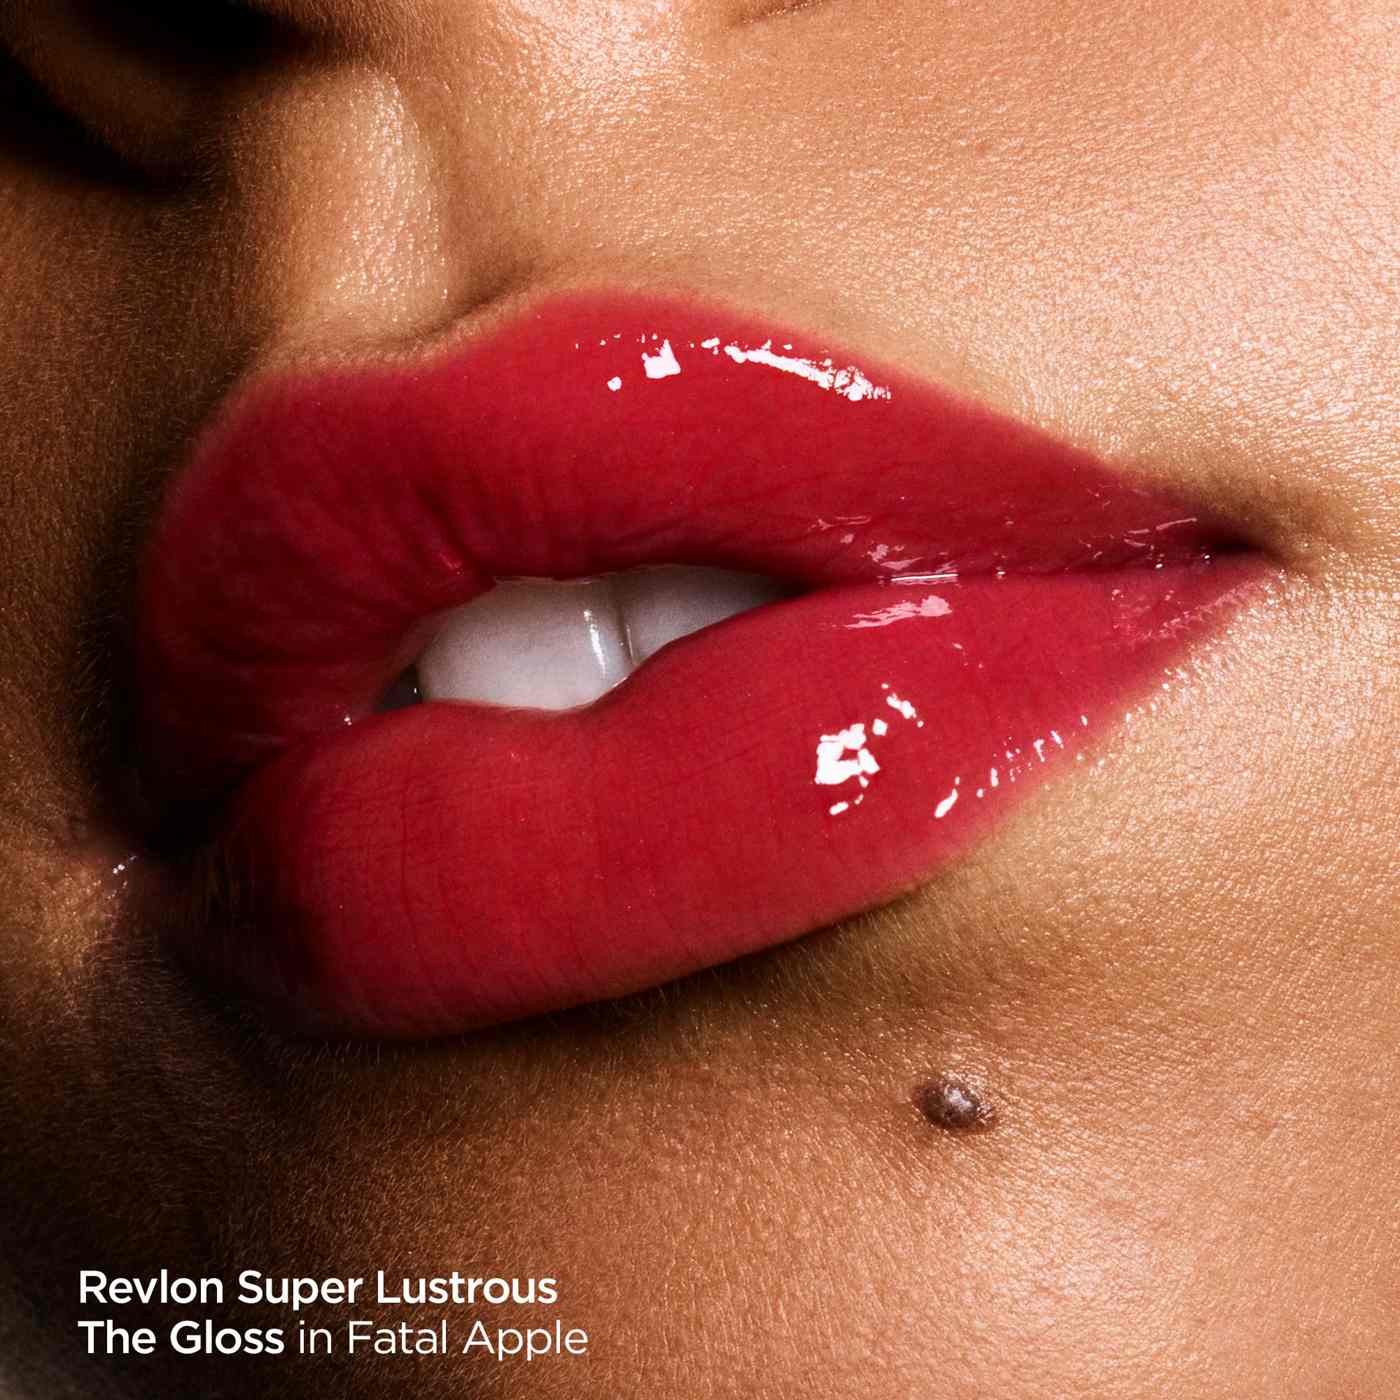 Revlon Super Lustrous The Gloss, 210 Pinkissimo; image 3 of 9